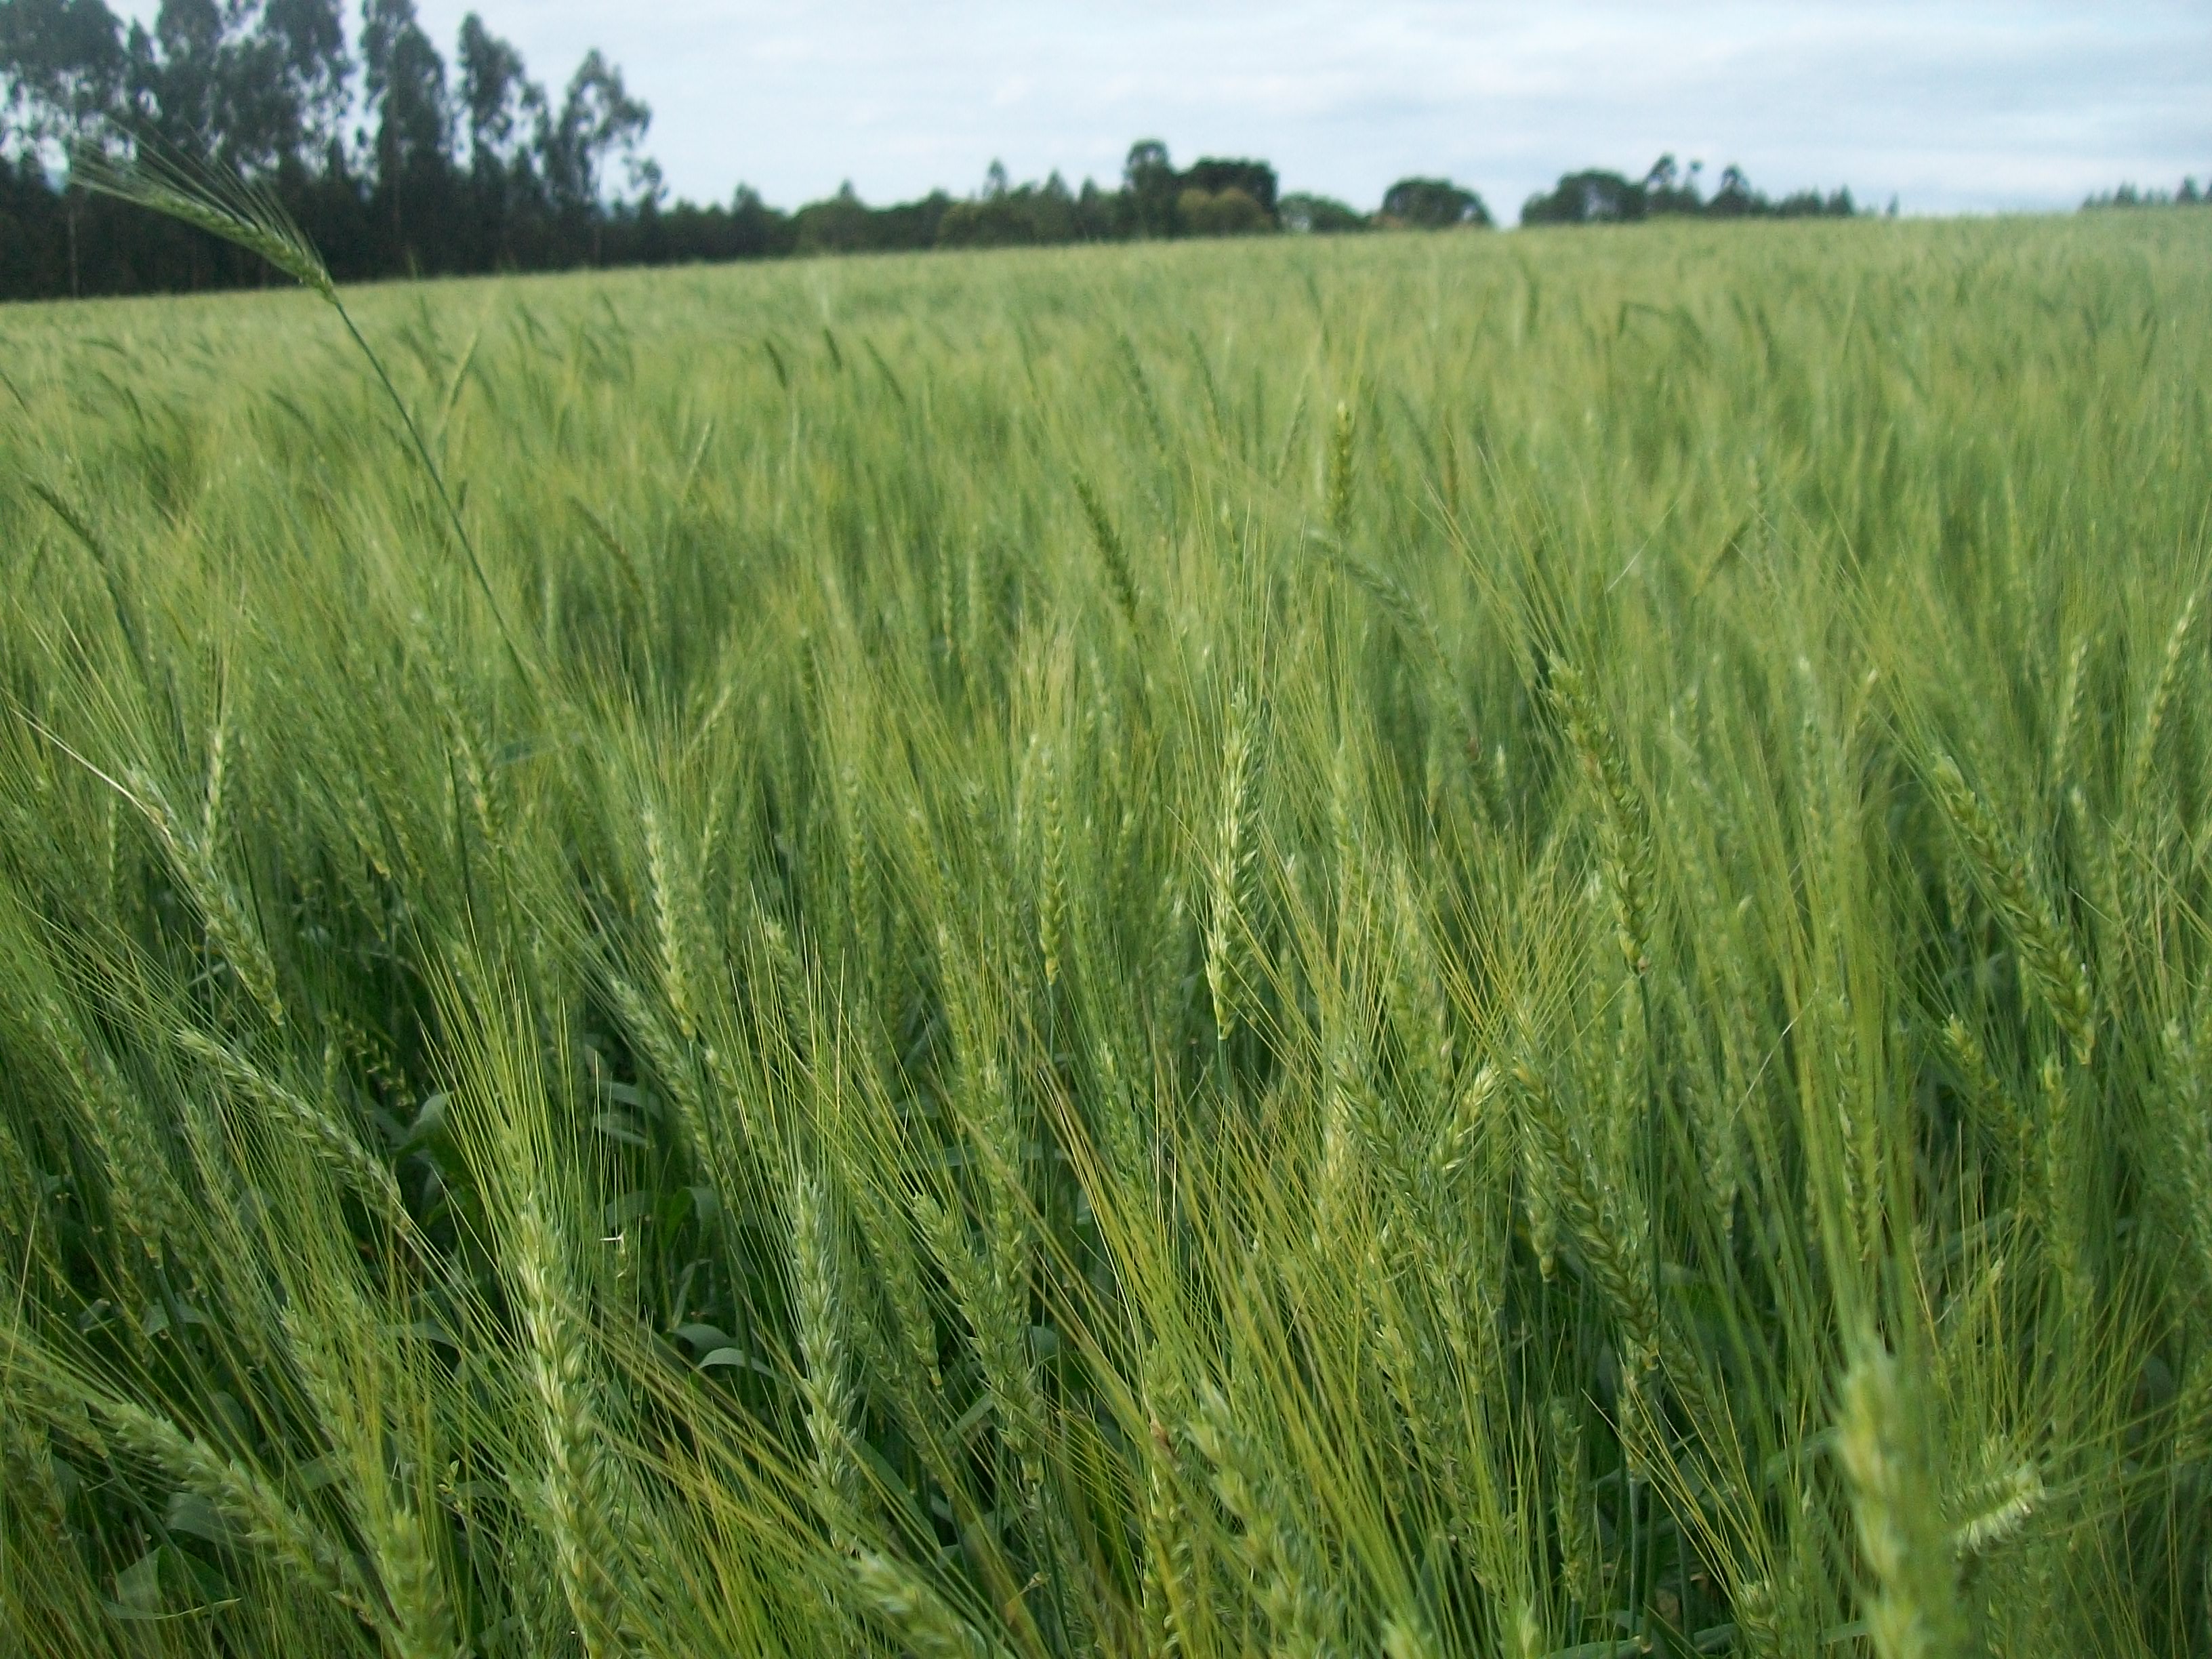 Induction of resistance in wheat